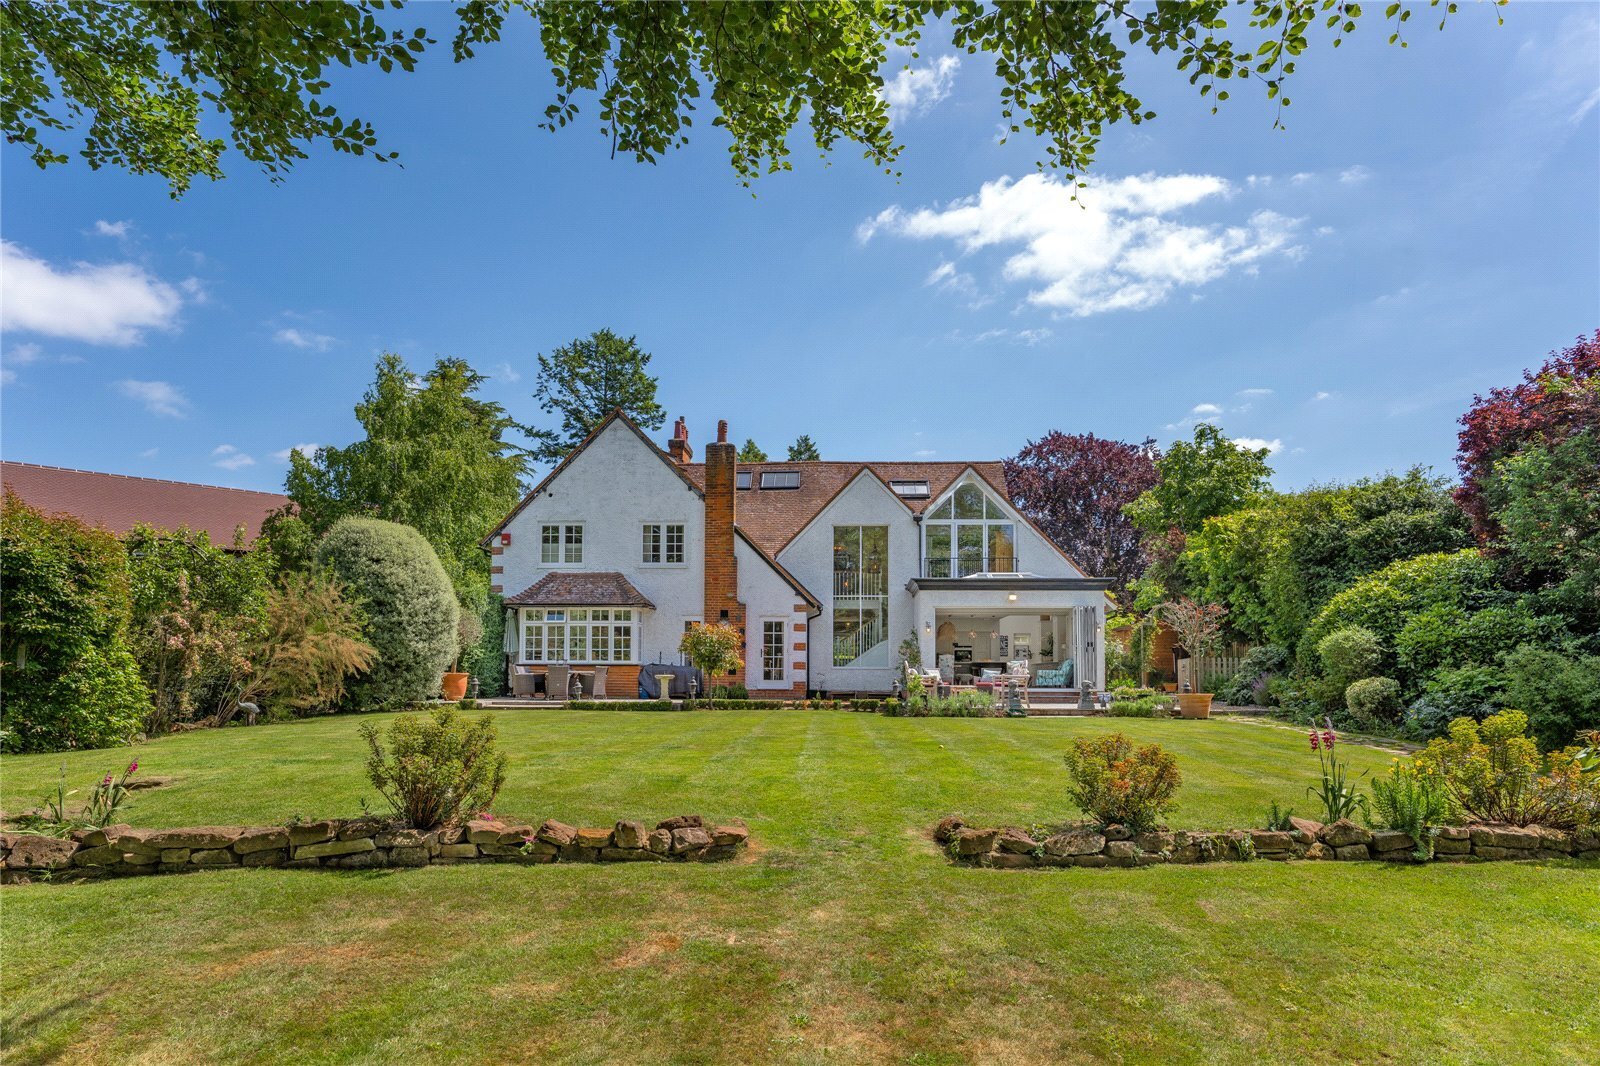 a-tastefully-presented-home-in-buckinghamshire-which-offers-a-countryside-feel-in-a-suburban-setting